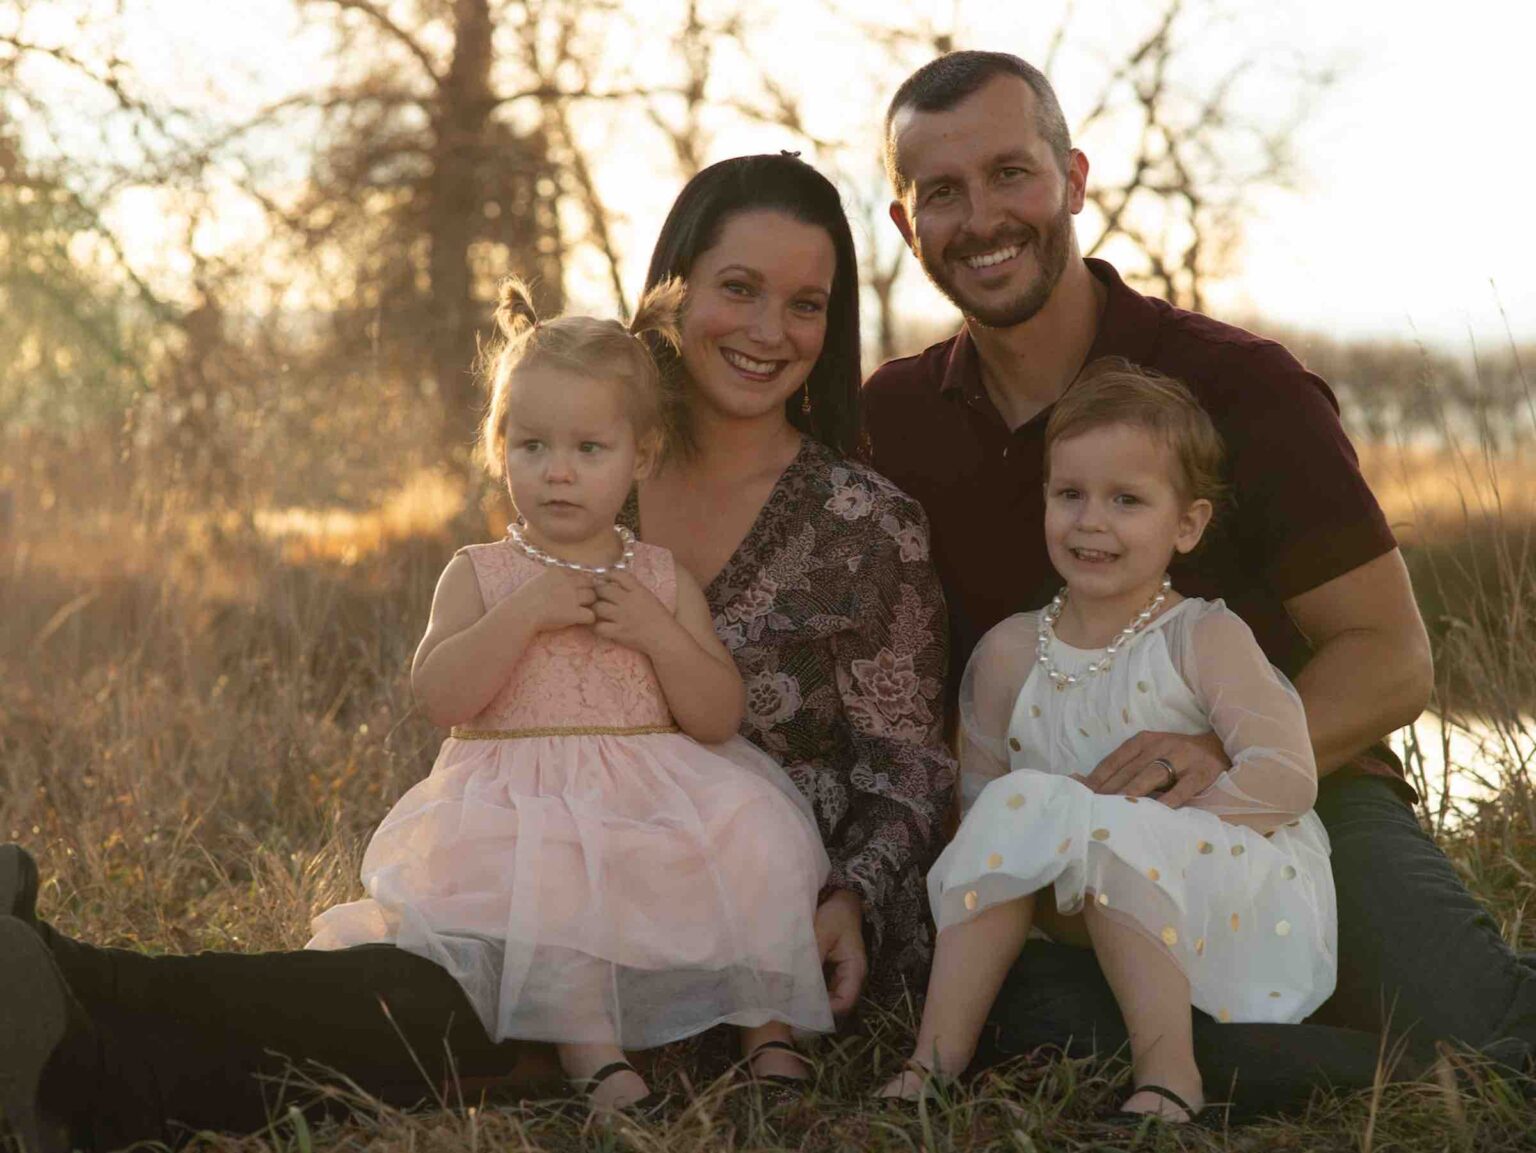 Netflix released the trailer for their true crime movie focused on Chris Watts, 'American Murder: The Family Next Door'. Check it out.